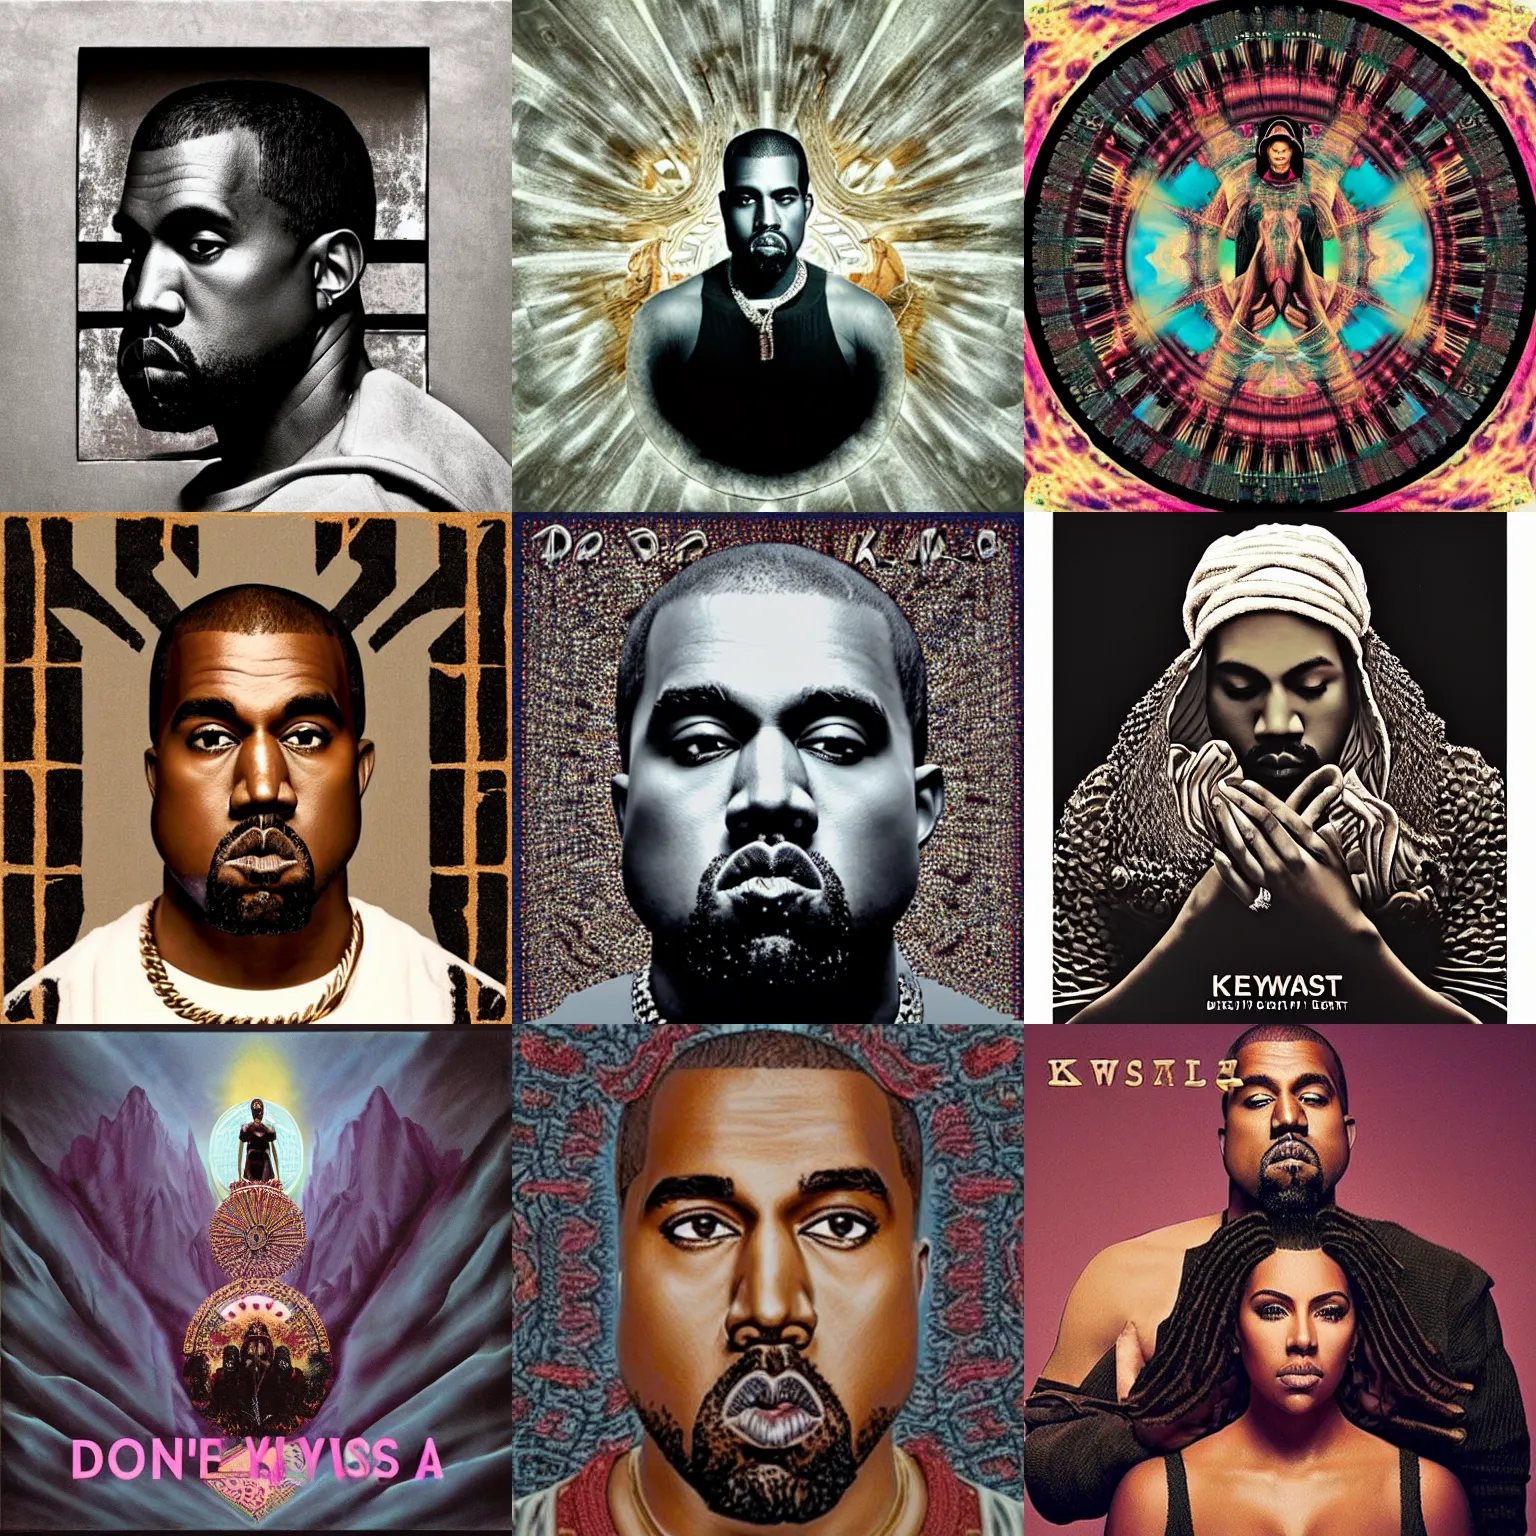 Prompt: kanye west donda album cover, beautiful, coherent, religious